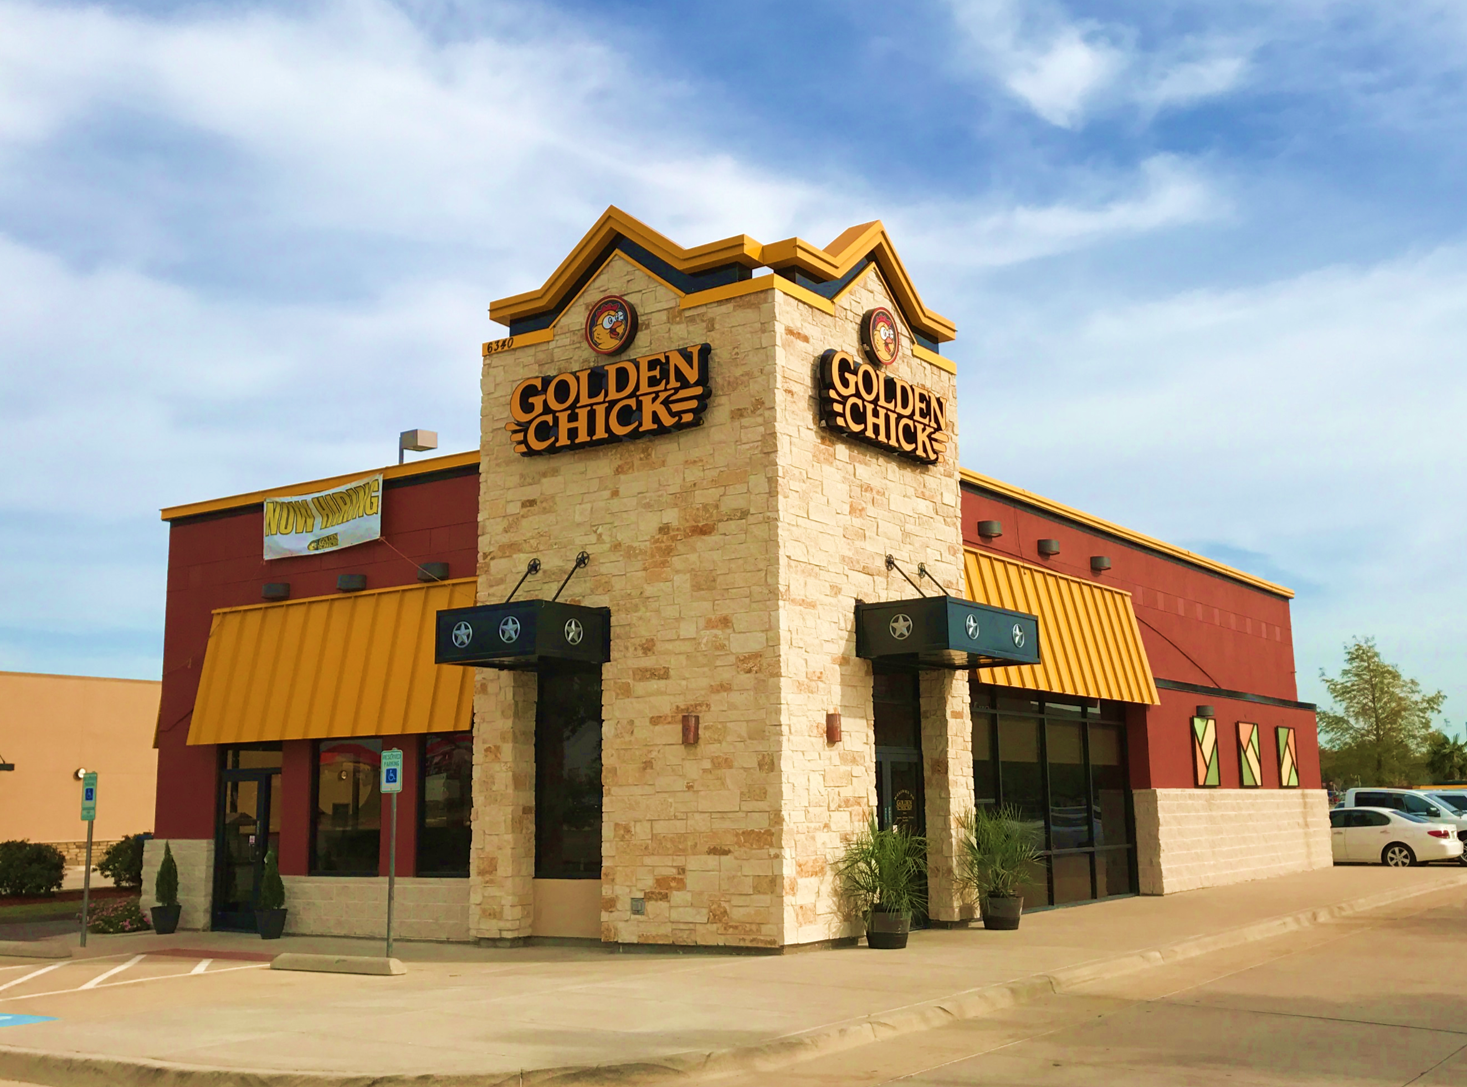 Golden Chick storefront.  Your local Golden Chick fast food restaurant in Lewisville, Texas